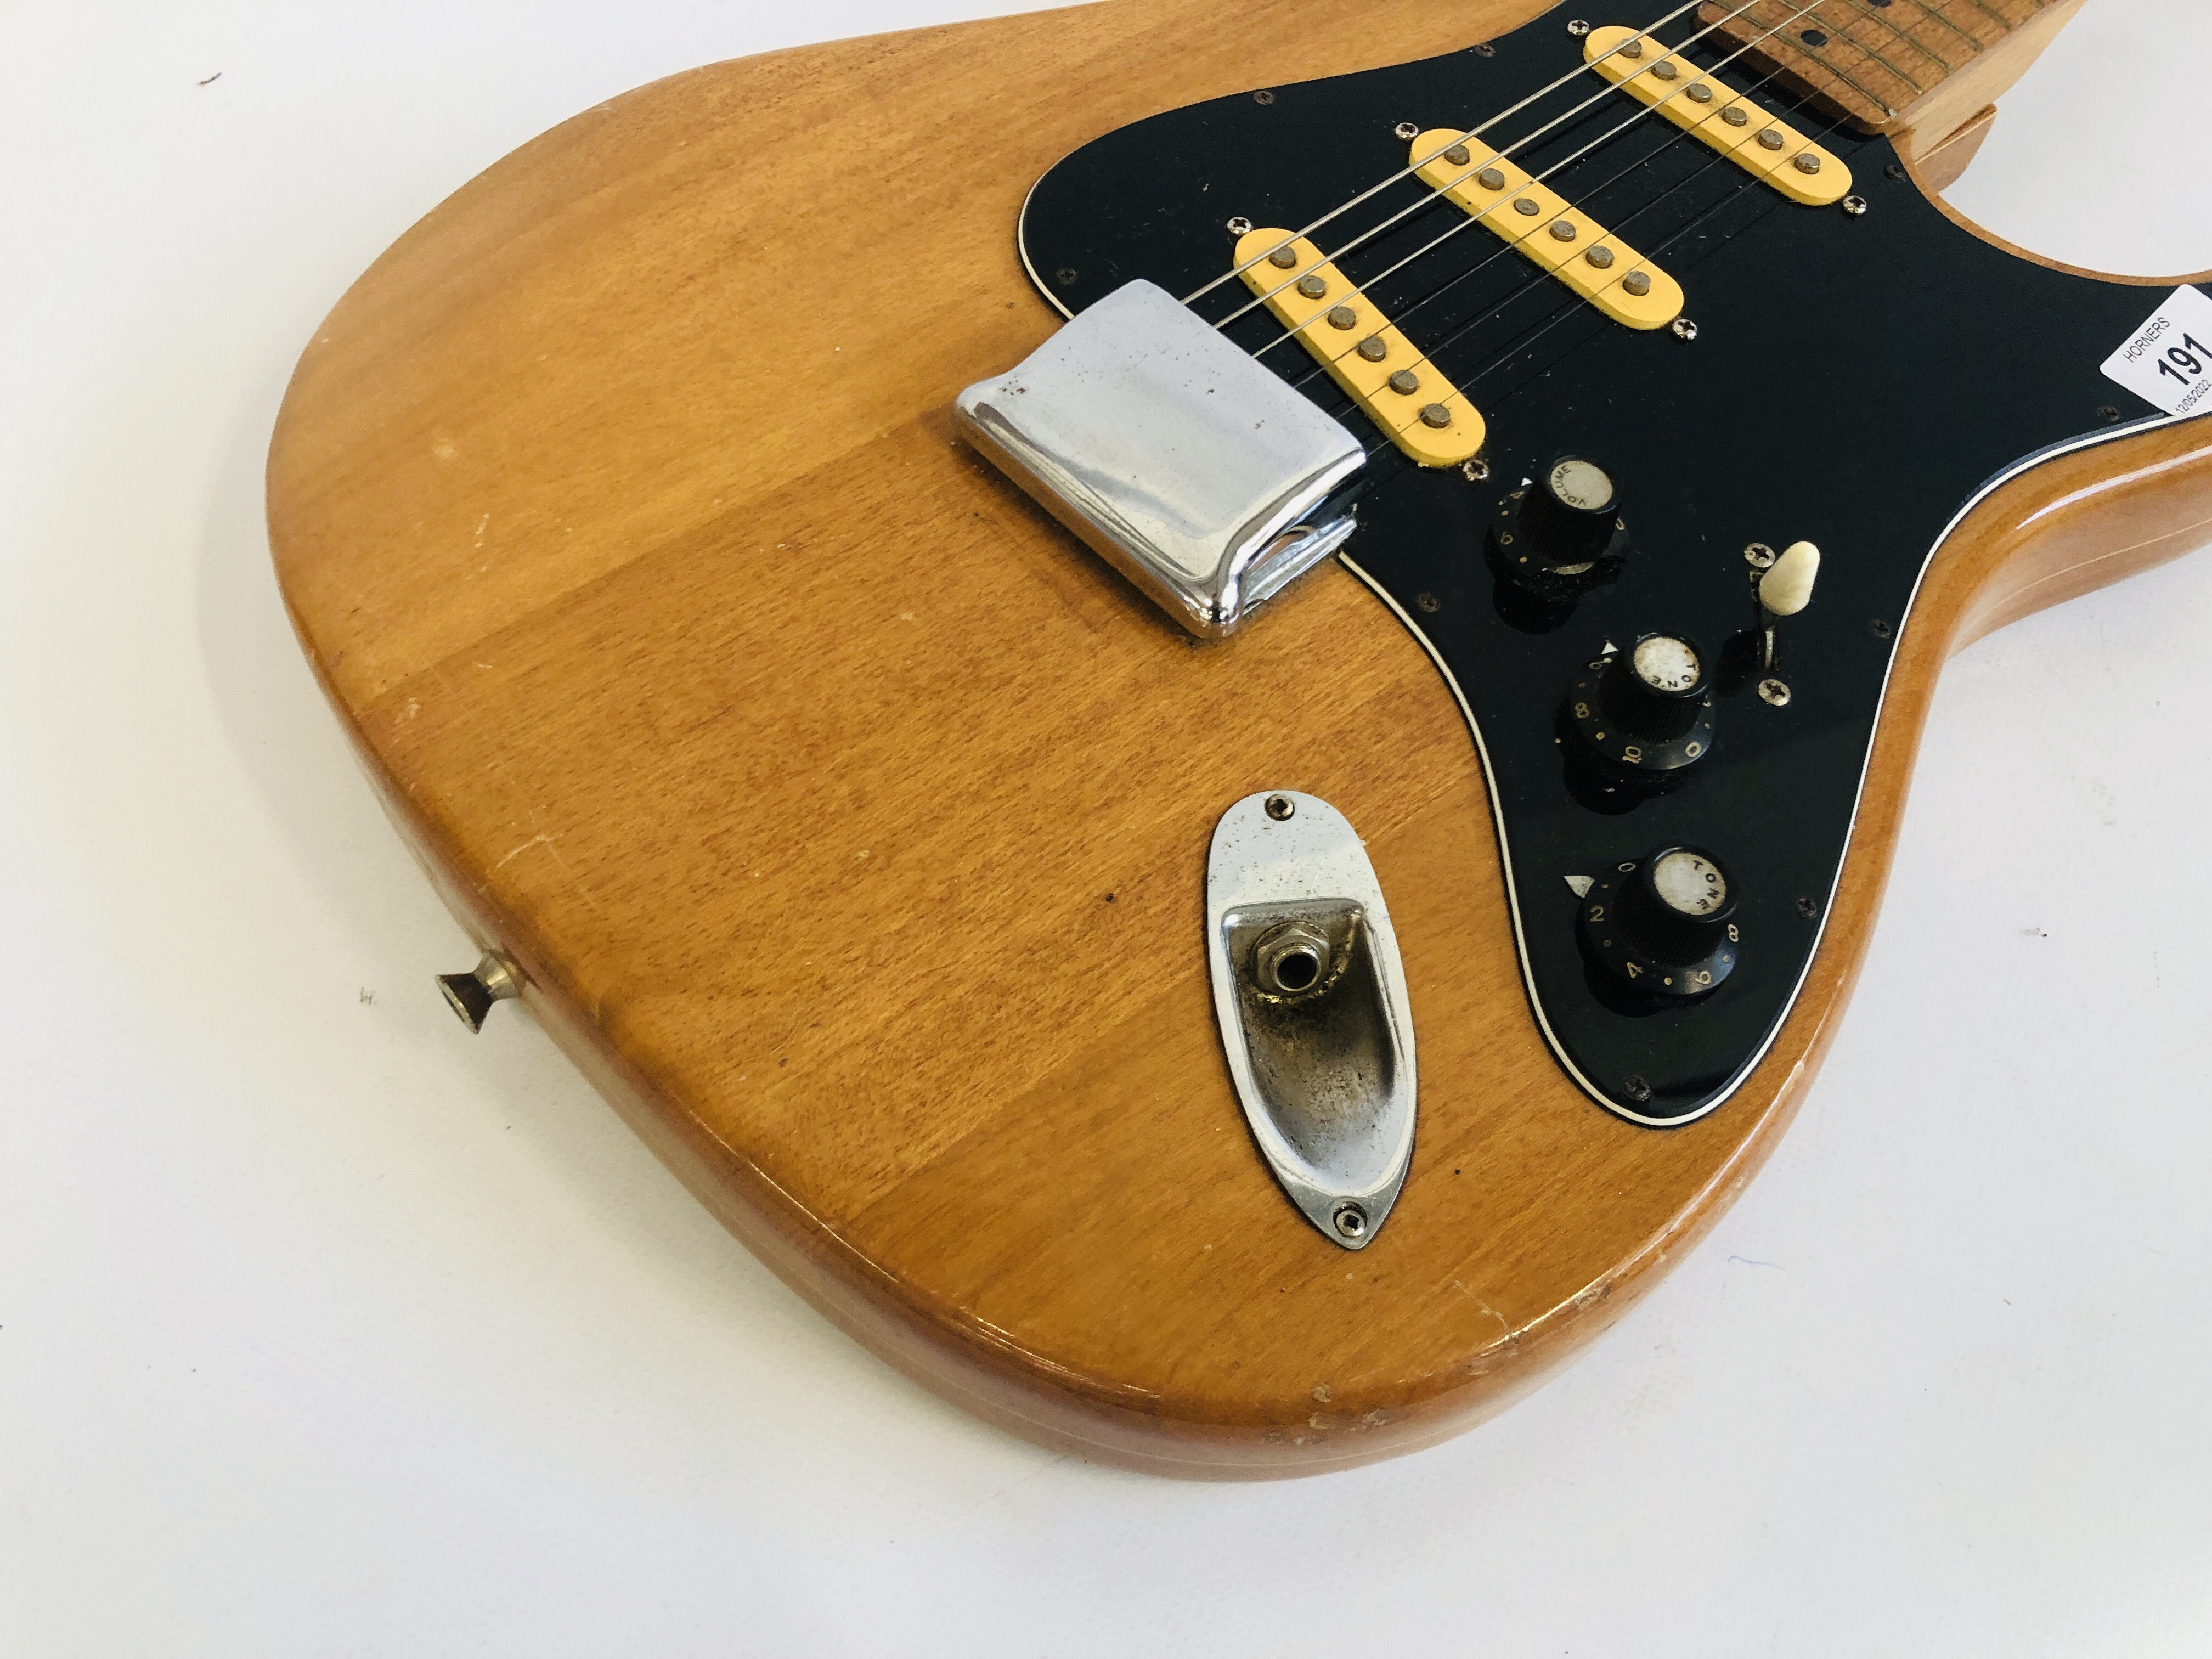 A KAY ELECTRIC GUITAR IN WOOD LAMINATE FINISH ALONG WITH TRAVEL CASE (A/F) - Image 2 of 12